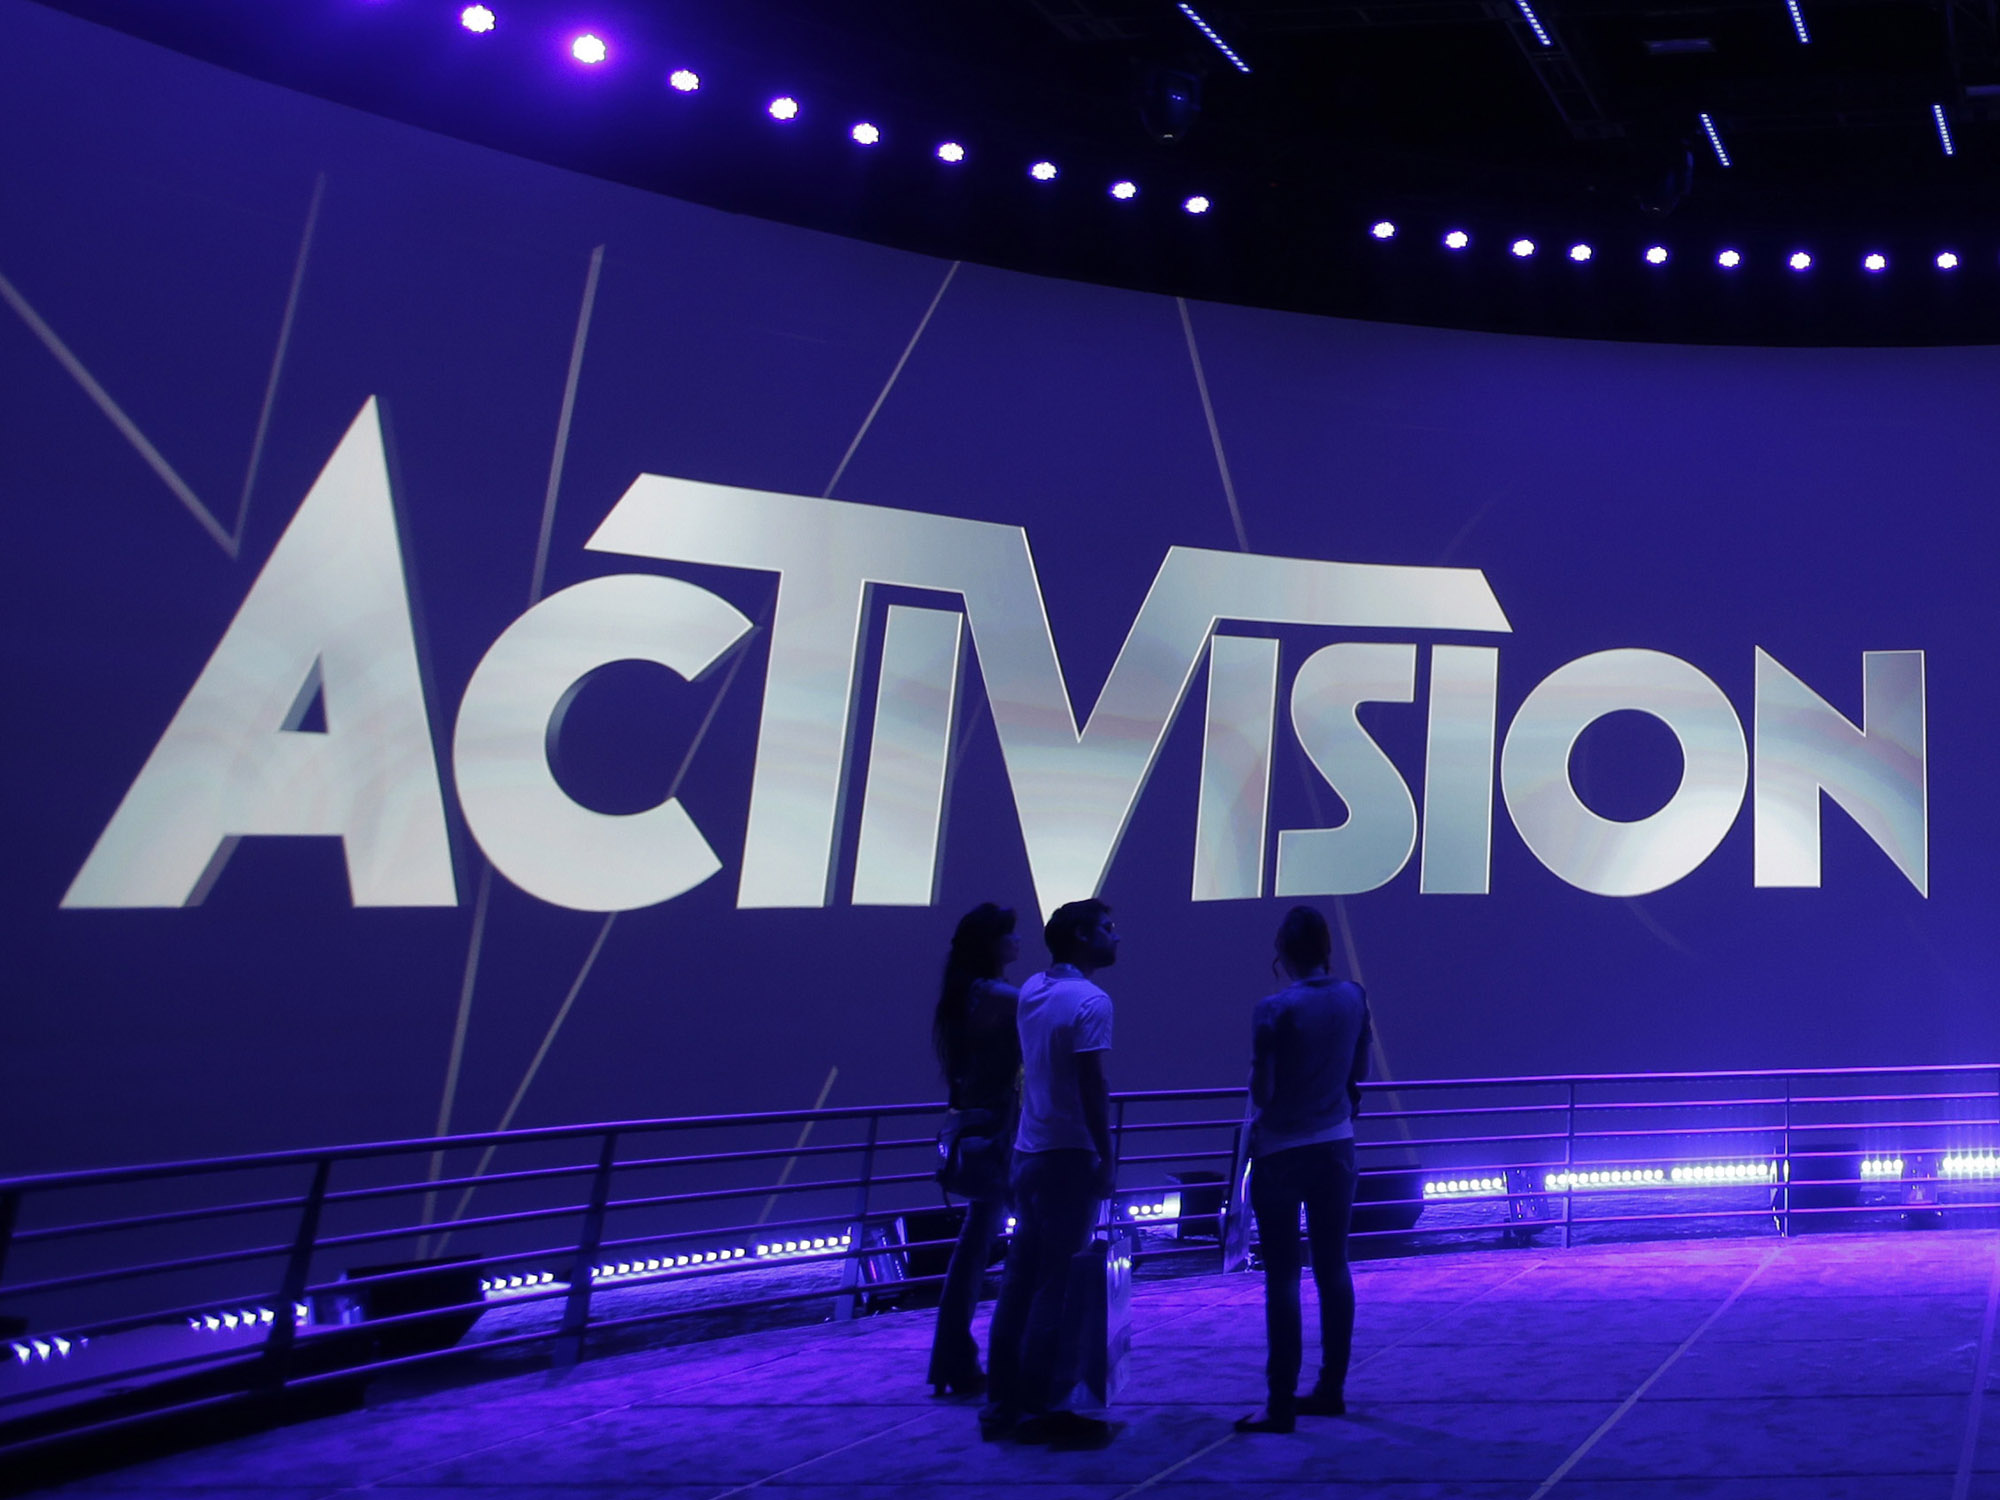 Activision Blizzard Has Harassment Problems, so Do Sony, Ubisoft,  -  Bloomberg